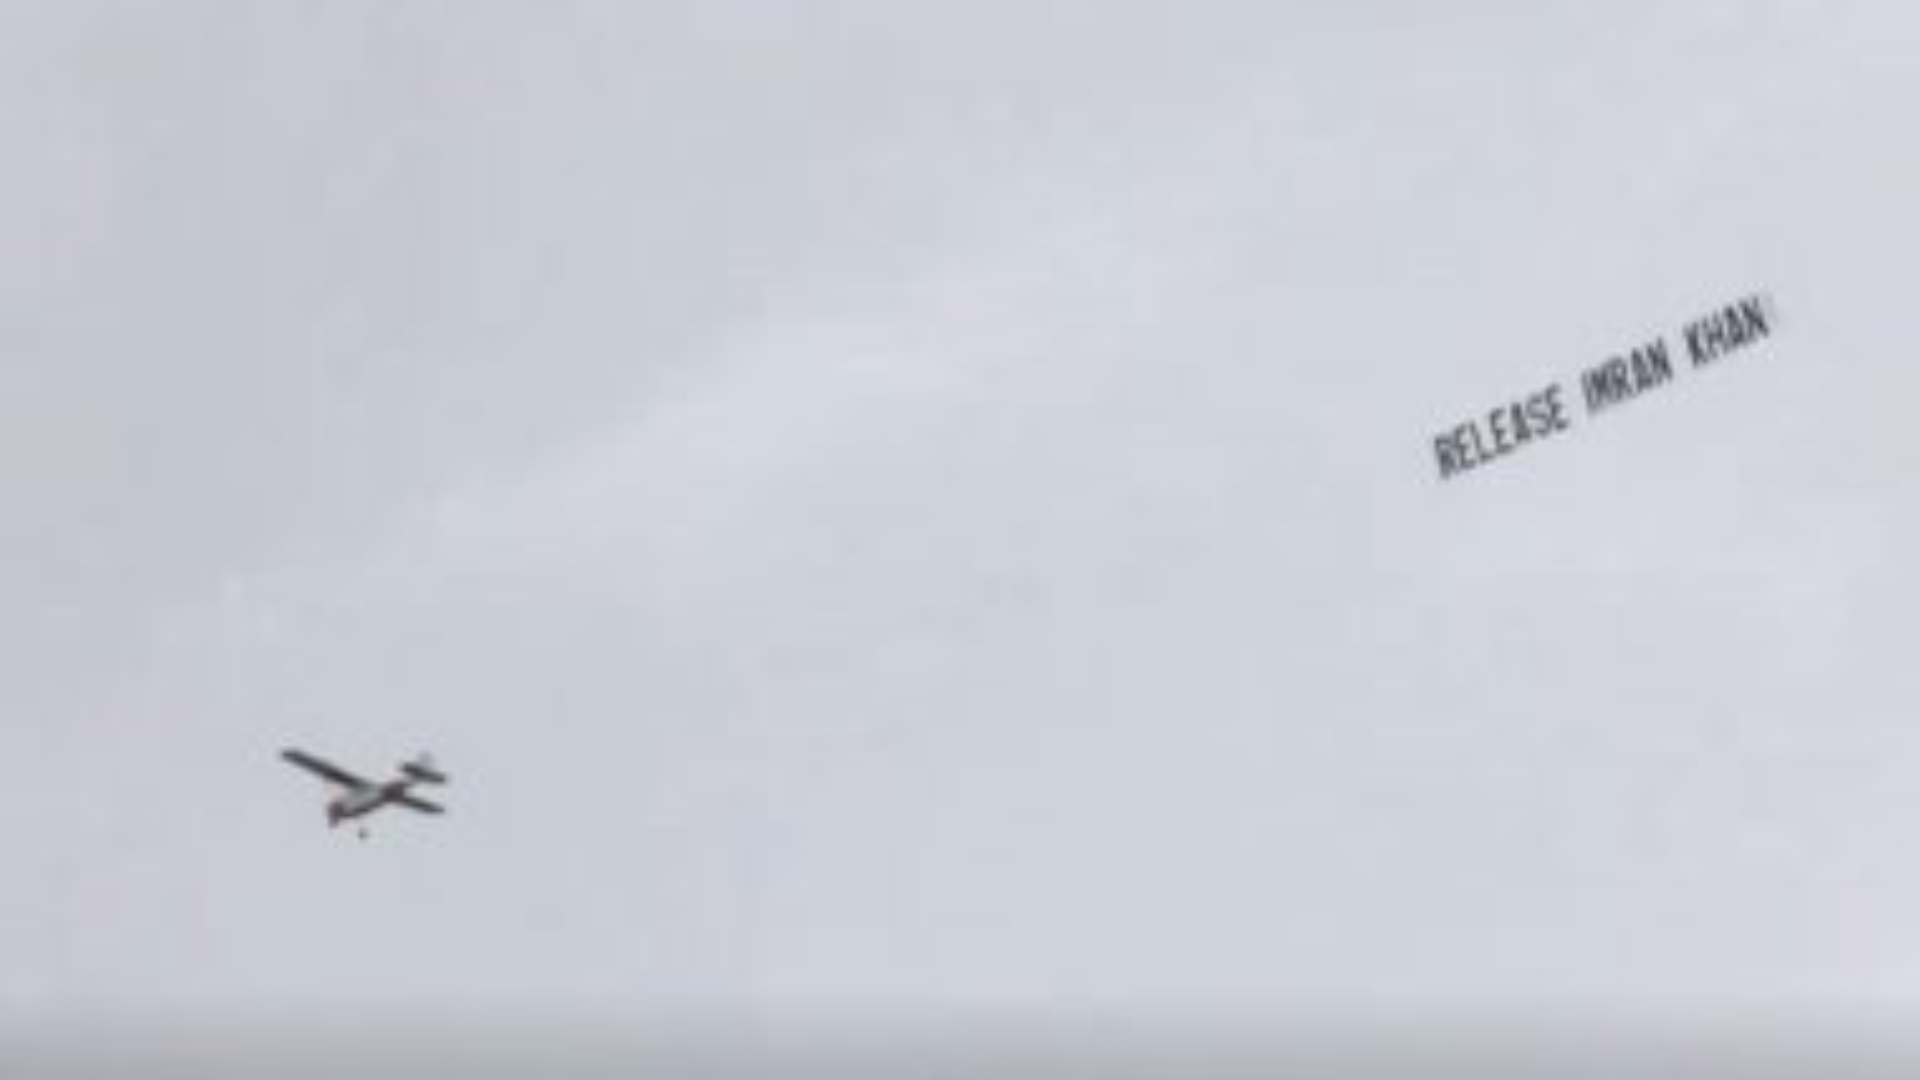 Watch: Aircraft Carrying 'Release Imran Khan' Message Spotted During India-Pakistan T20 World Cup Clash